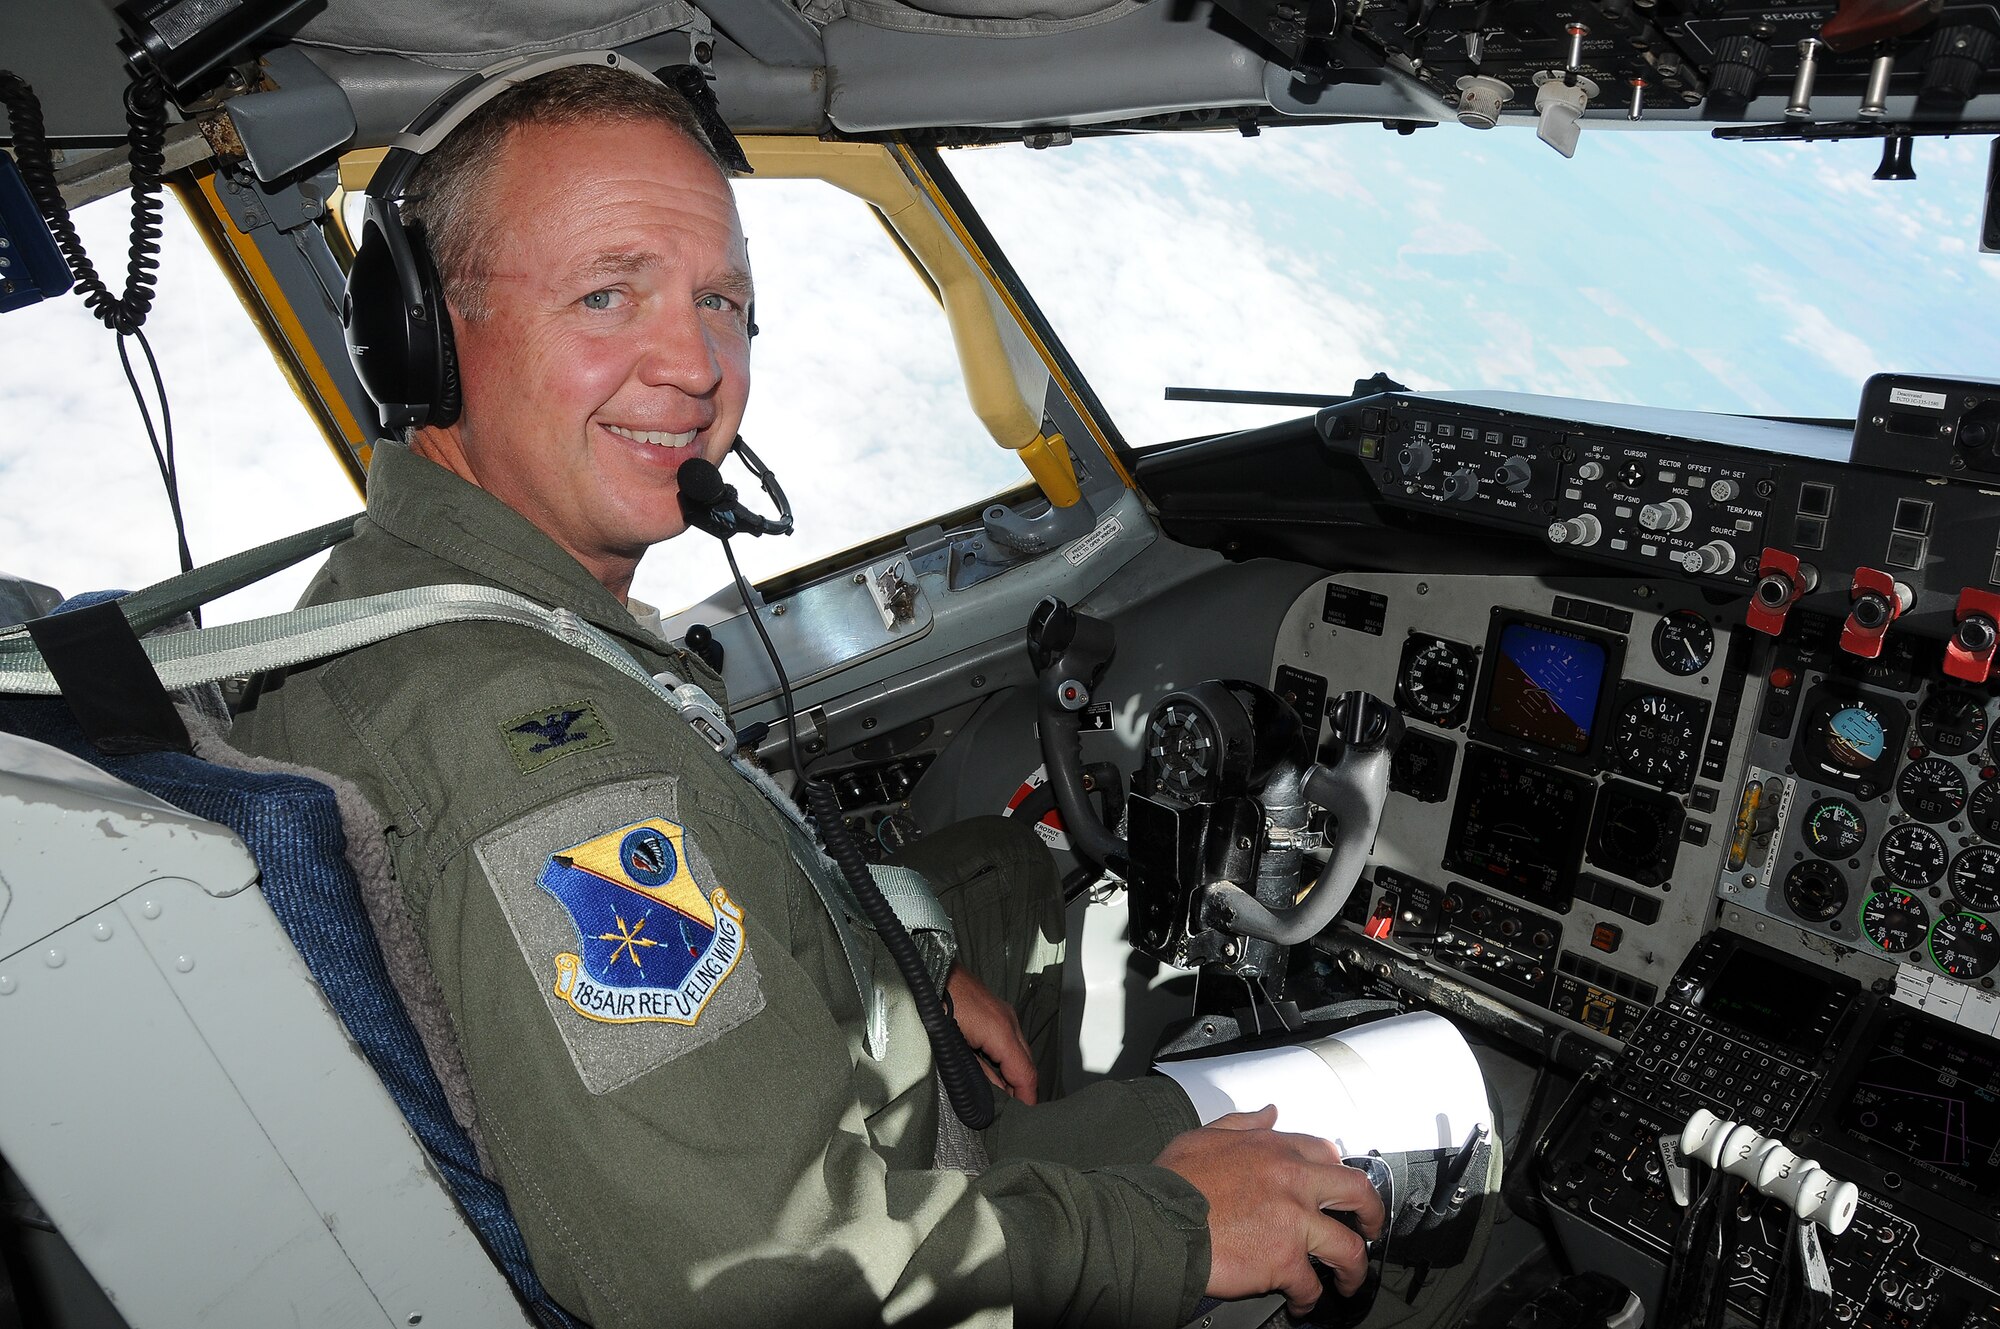 185th Air Refueling Wing Commander Col Larry Christensen pilots an Air Force KC-135R during a local training mission on Thursday June 4, 2015. The flight originated from the Iowa Air National Guard unit's home base in Sioux City, Iowa. (U.S. Air National Guard photo by Master Sgt. Vincent De Groot/Released)